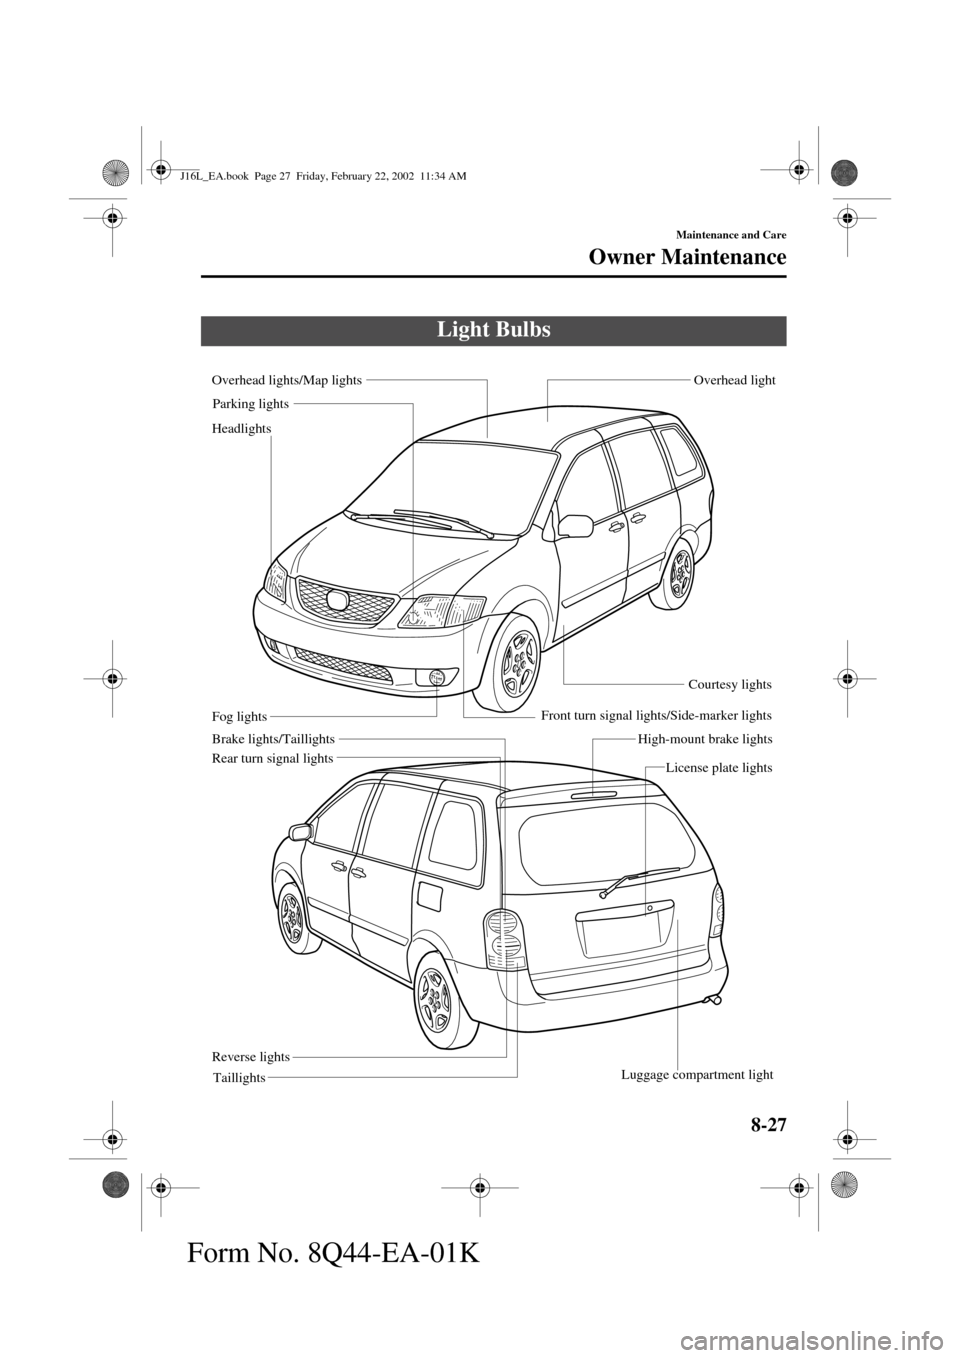 MAZDA MODEL MPV 2002  Owners Manual (in English) 8-27
Maintenance and Care
Owner Maintenance
Form No. 8Q44-EA-01K
Light Bulbs
Rear turn signal lights
Reverse lights
TaillightsLicense plate lights
Luggage compartment lightOverhead light
Brake lights/